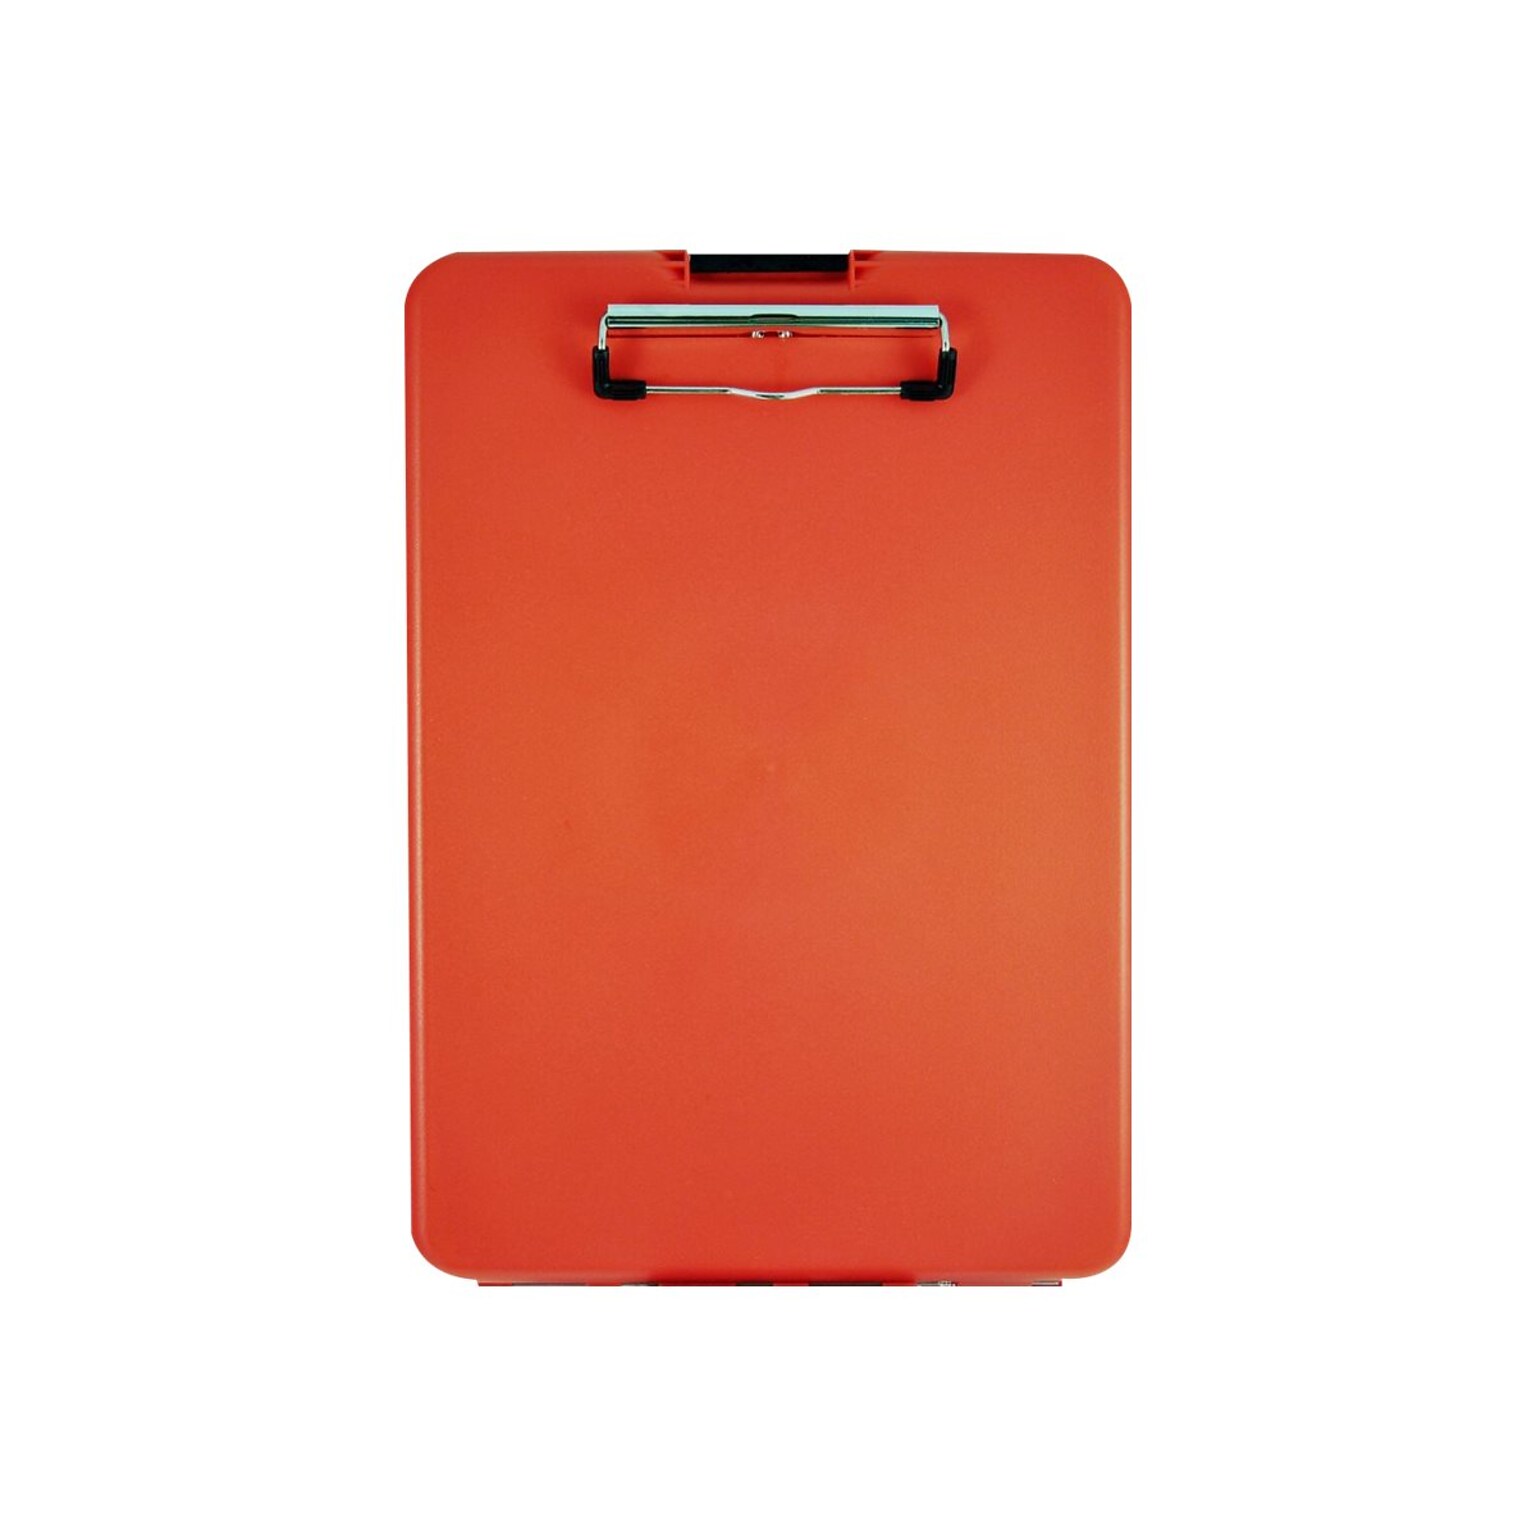 Saunders US-Works SlimMate Plastic Storage Clipboard, Letter Size, Red (00560)